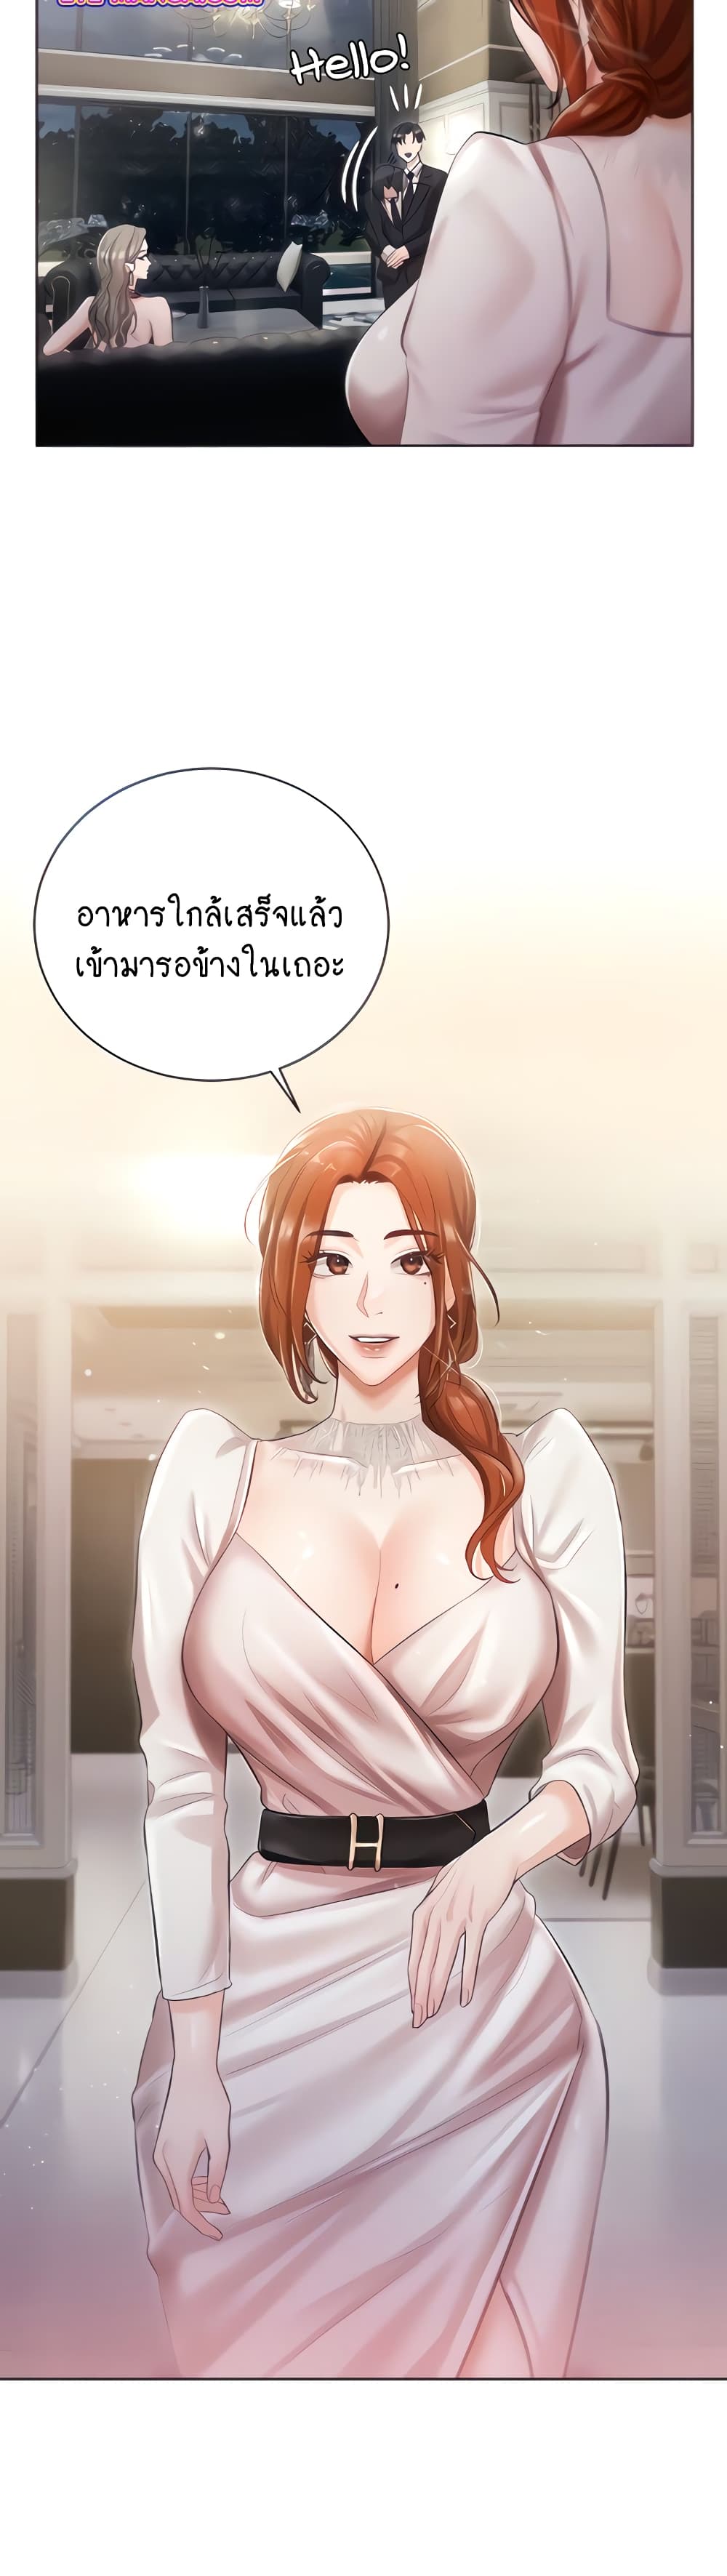 Hyeonjung’s Residence ตอนที่ 6